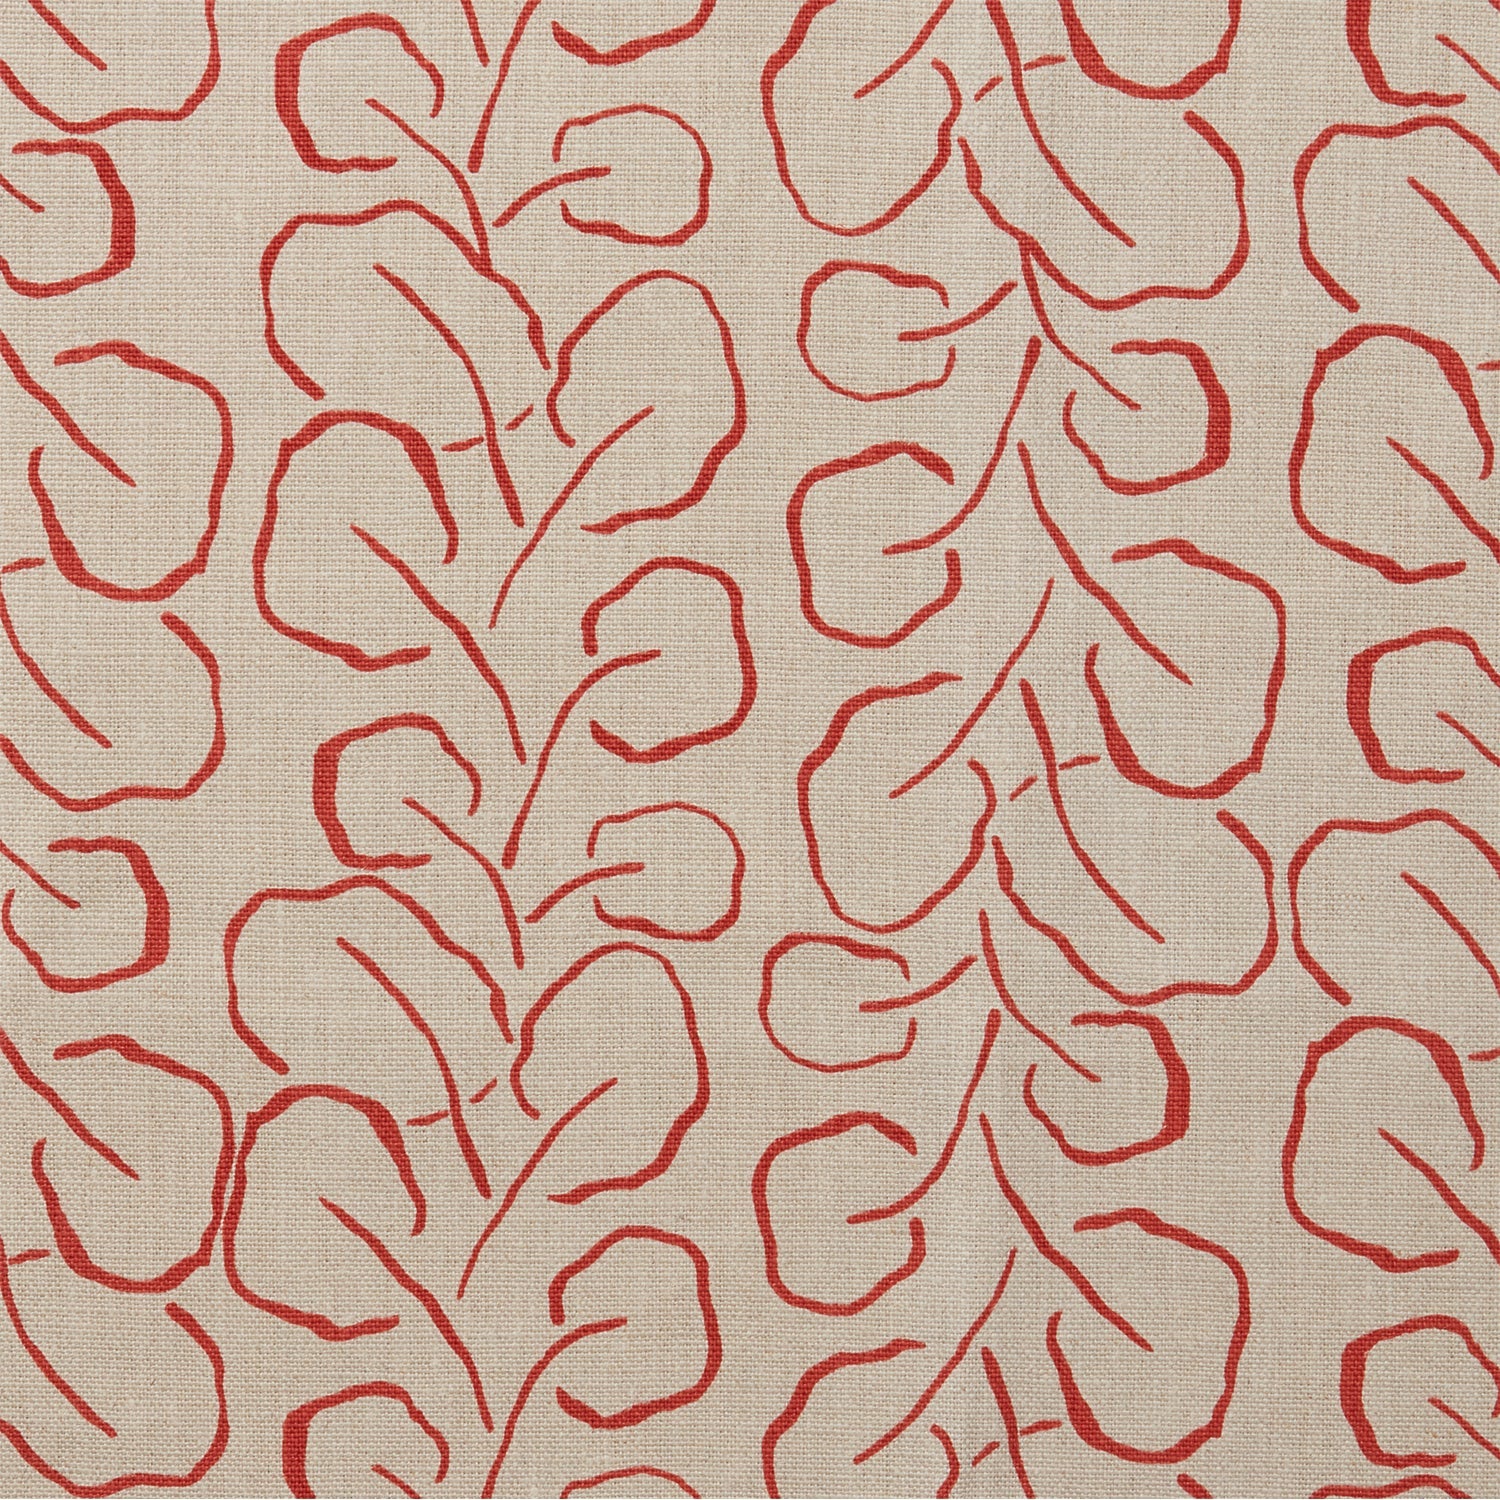 Woven fabric swatch with a large-scale repeating leaf print in red on a tan background.